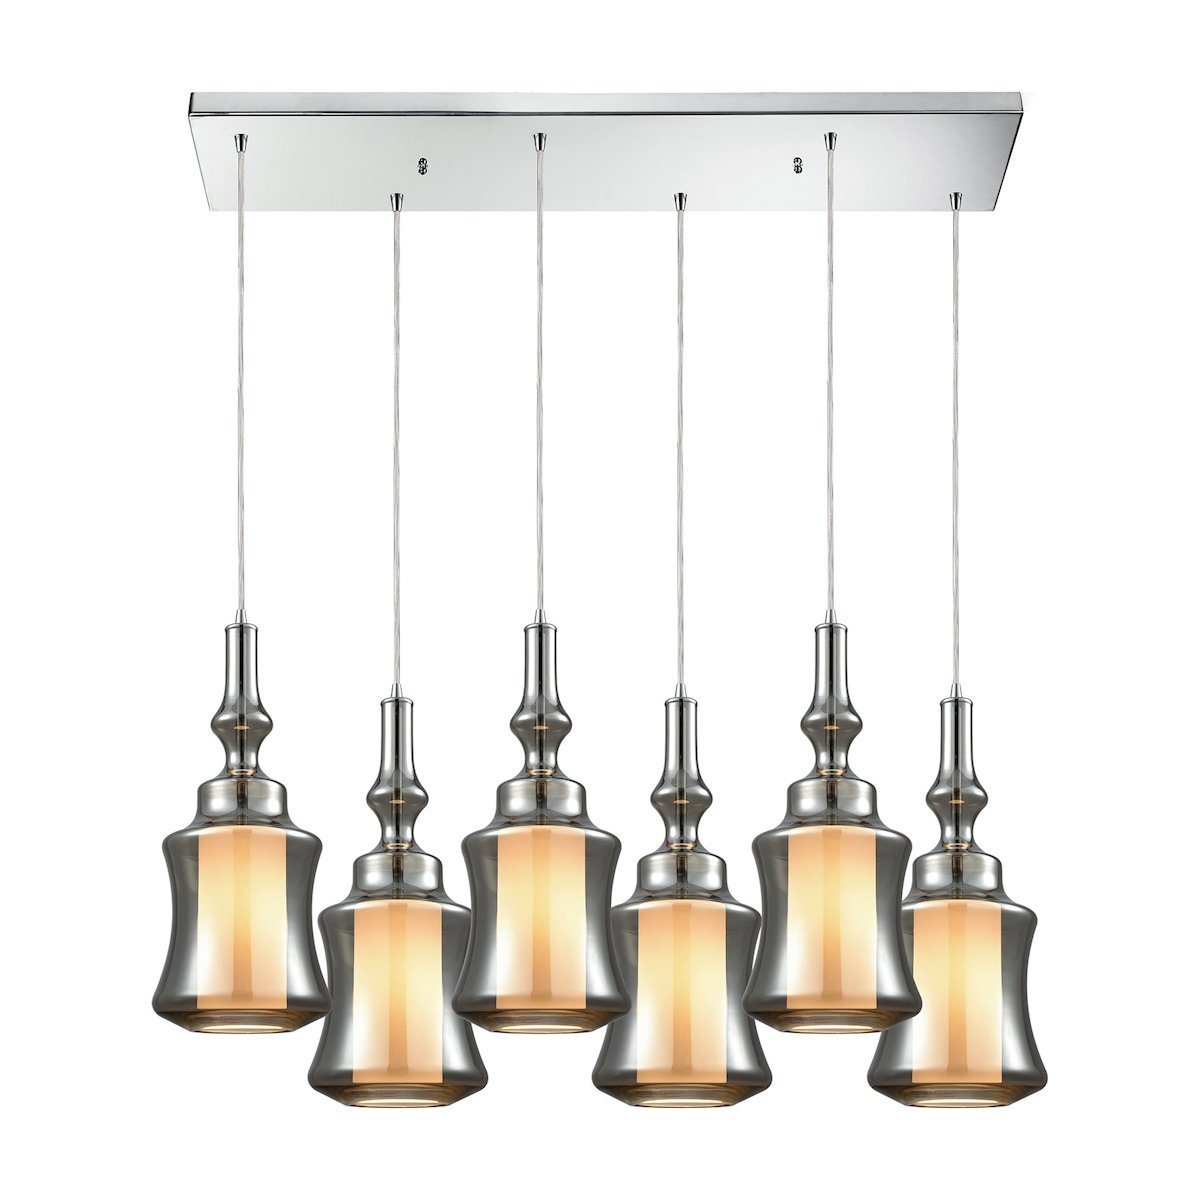 Alora 6 Light Rectangle Pendant In Polished Chrome With Opal White Glass Inside Smoke Plated Glass Ceiling Elk Lighting 